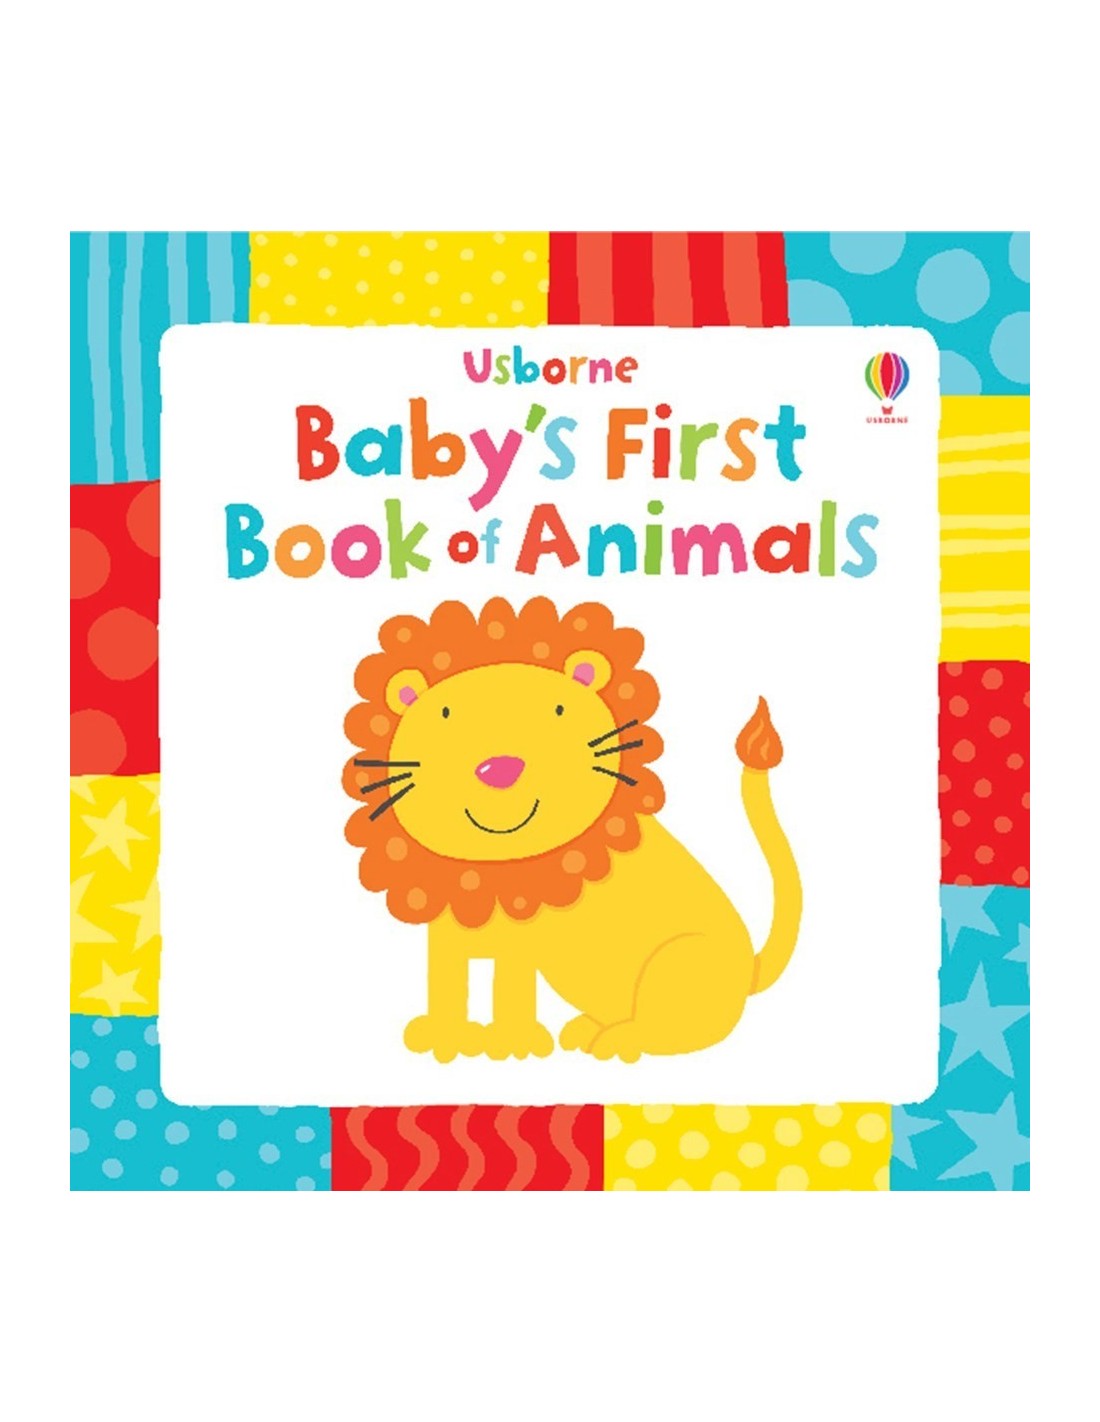 Baby's first book of animals